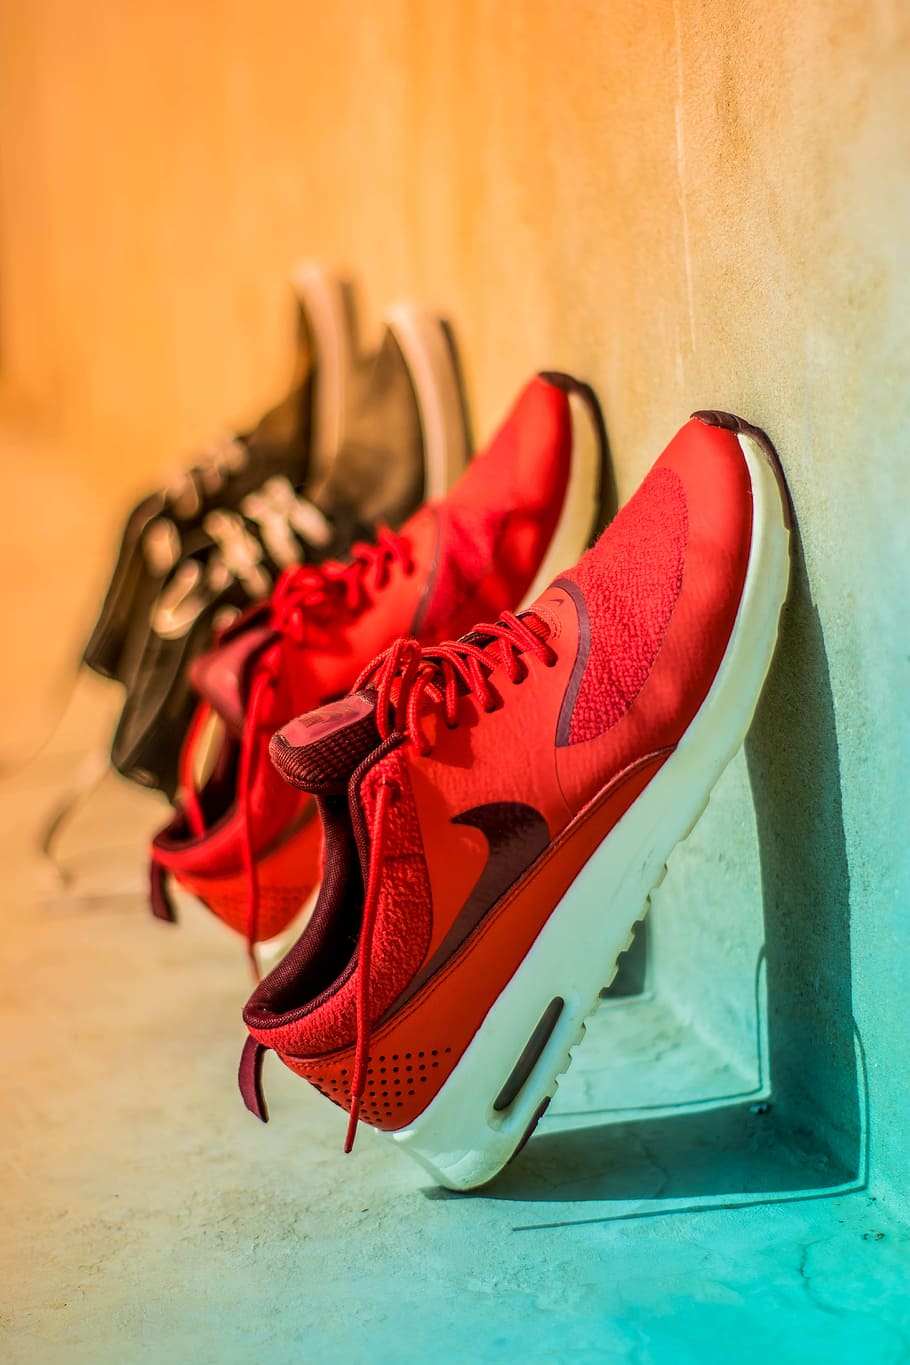 HD wallpaper: Focus Photography of Pair of Red Nike Running Shoes, best,  classic | Wallpaper Flare